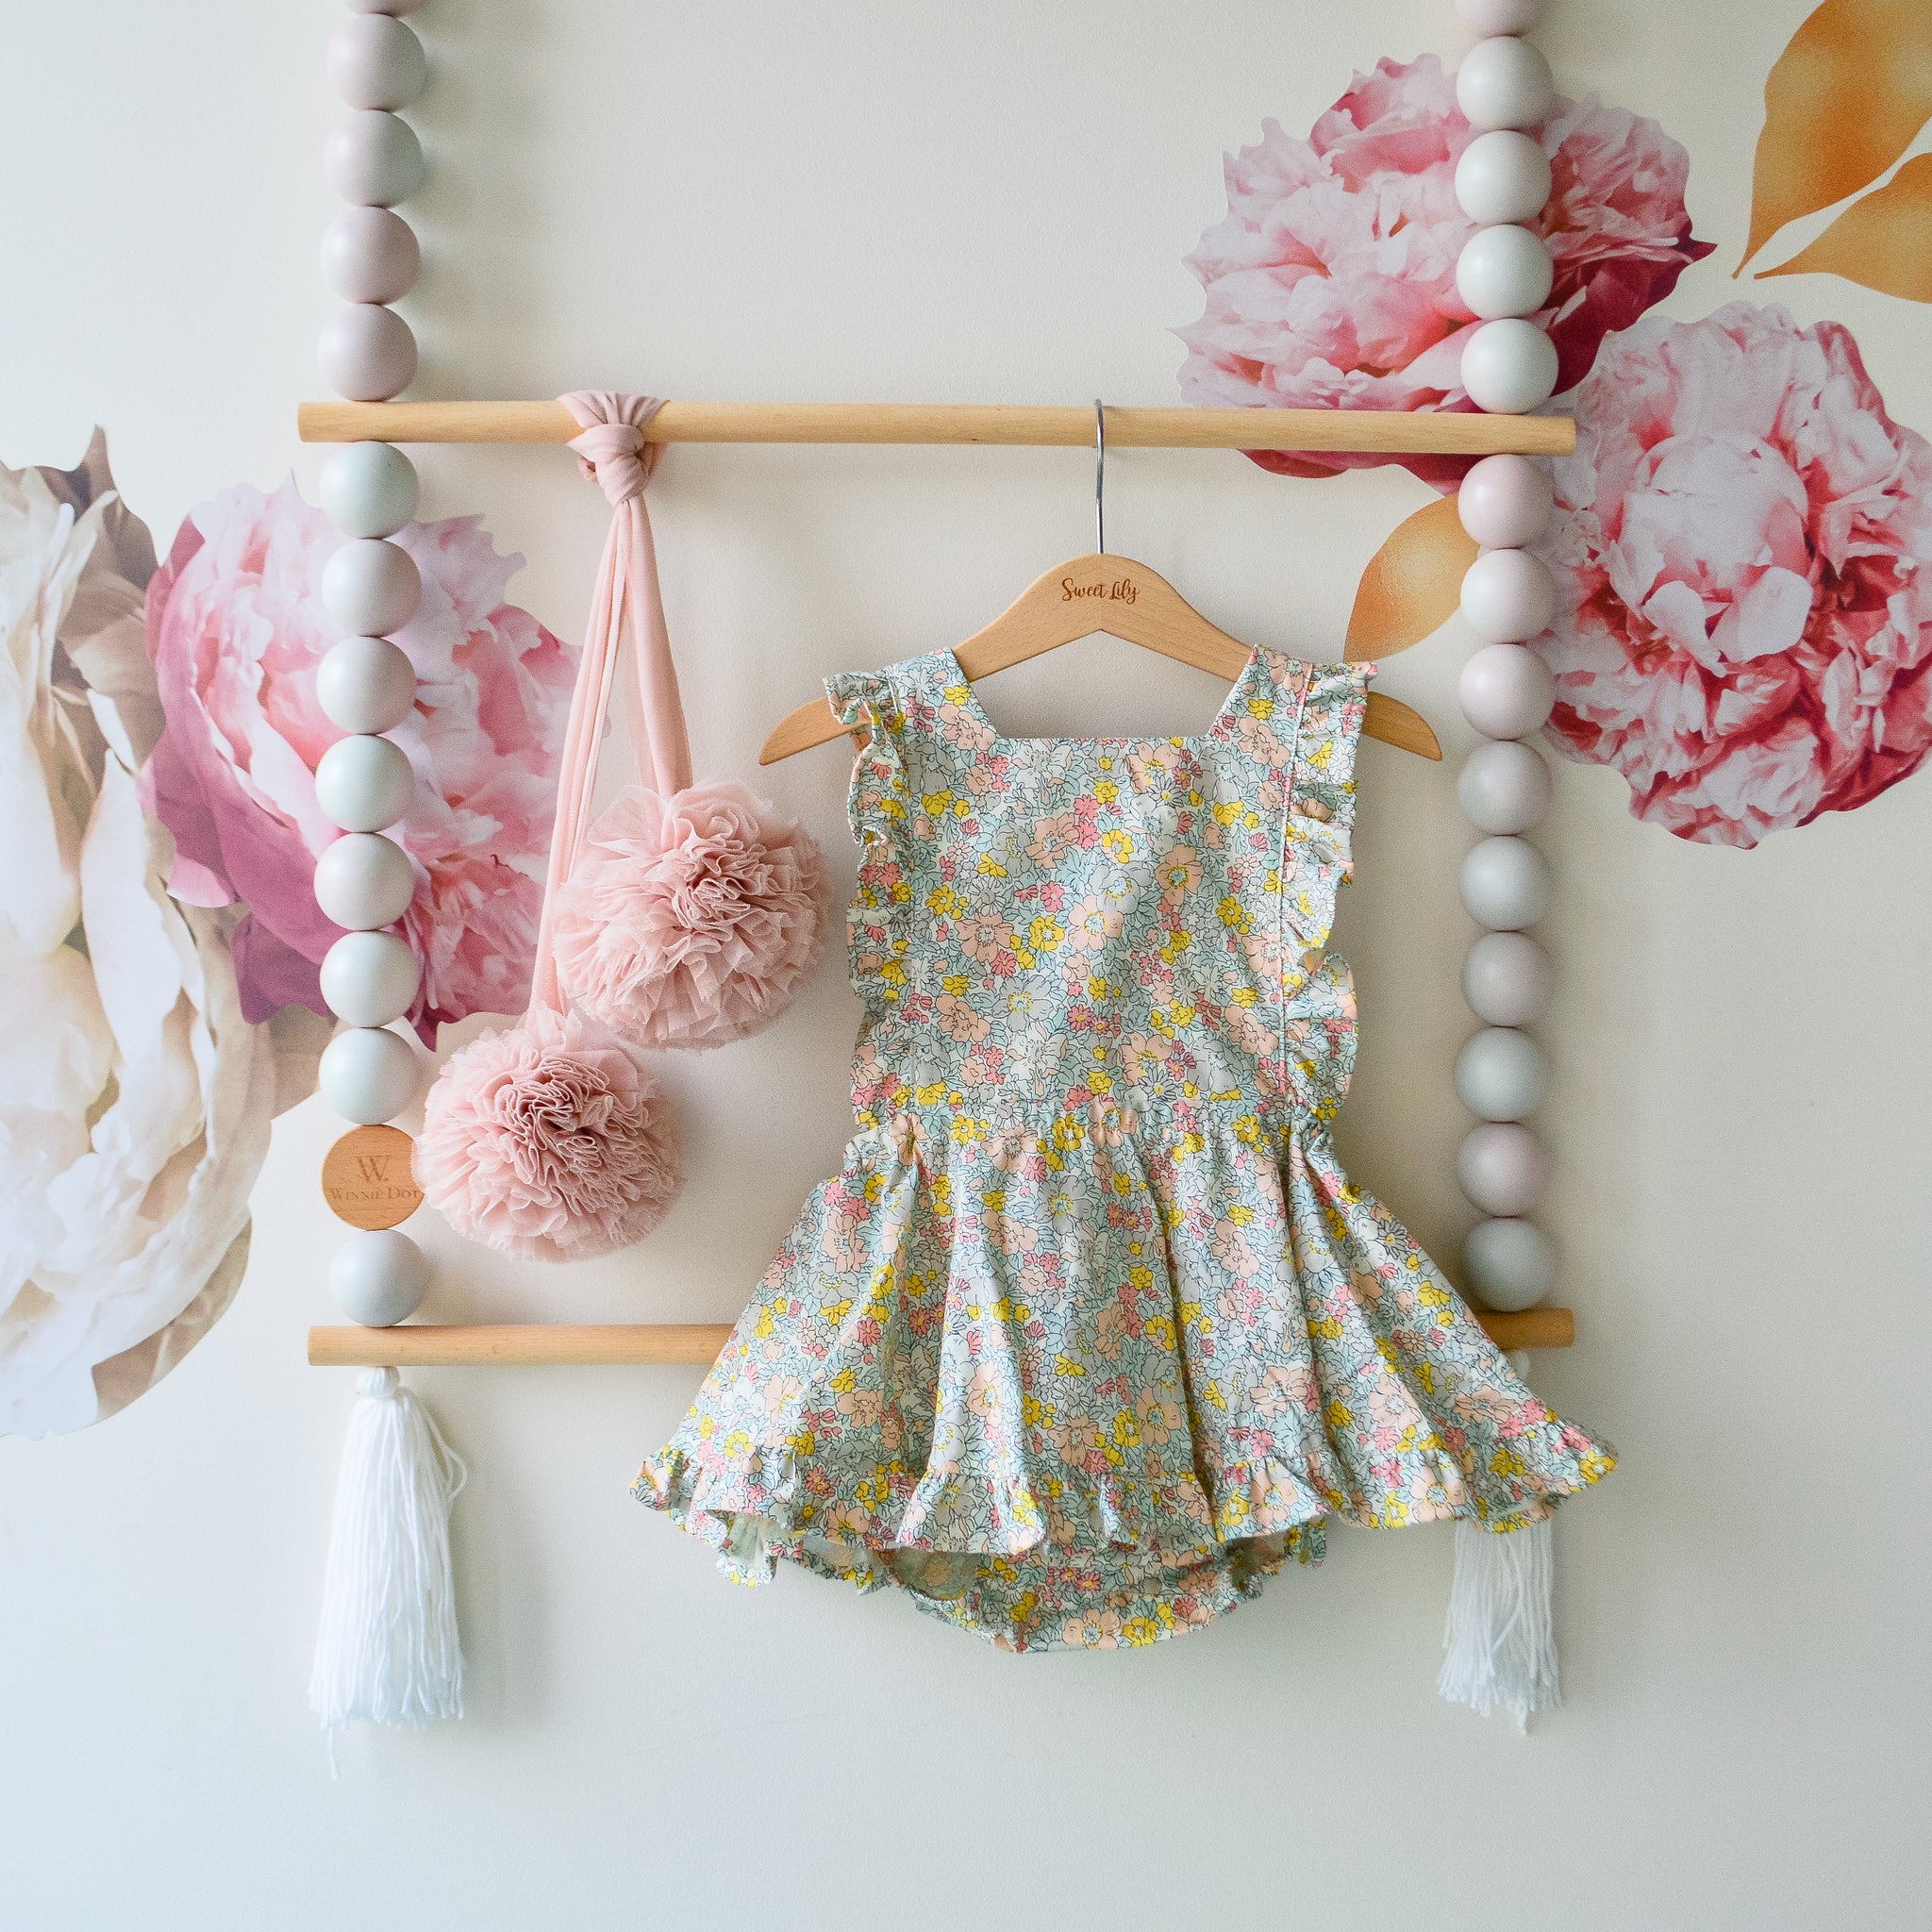 Mini Vintage Frilly Romper In Liberty Garden Sweet Lily Boutique